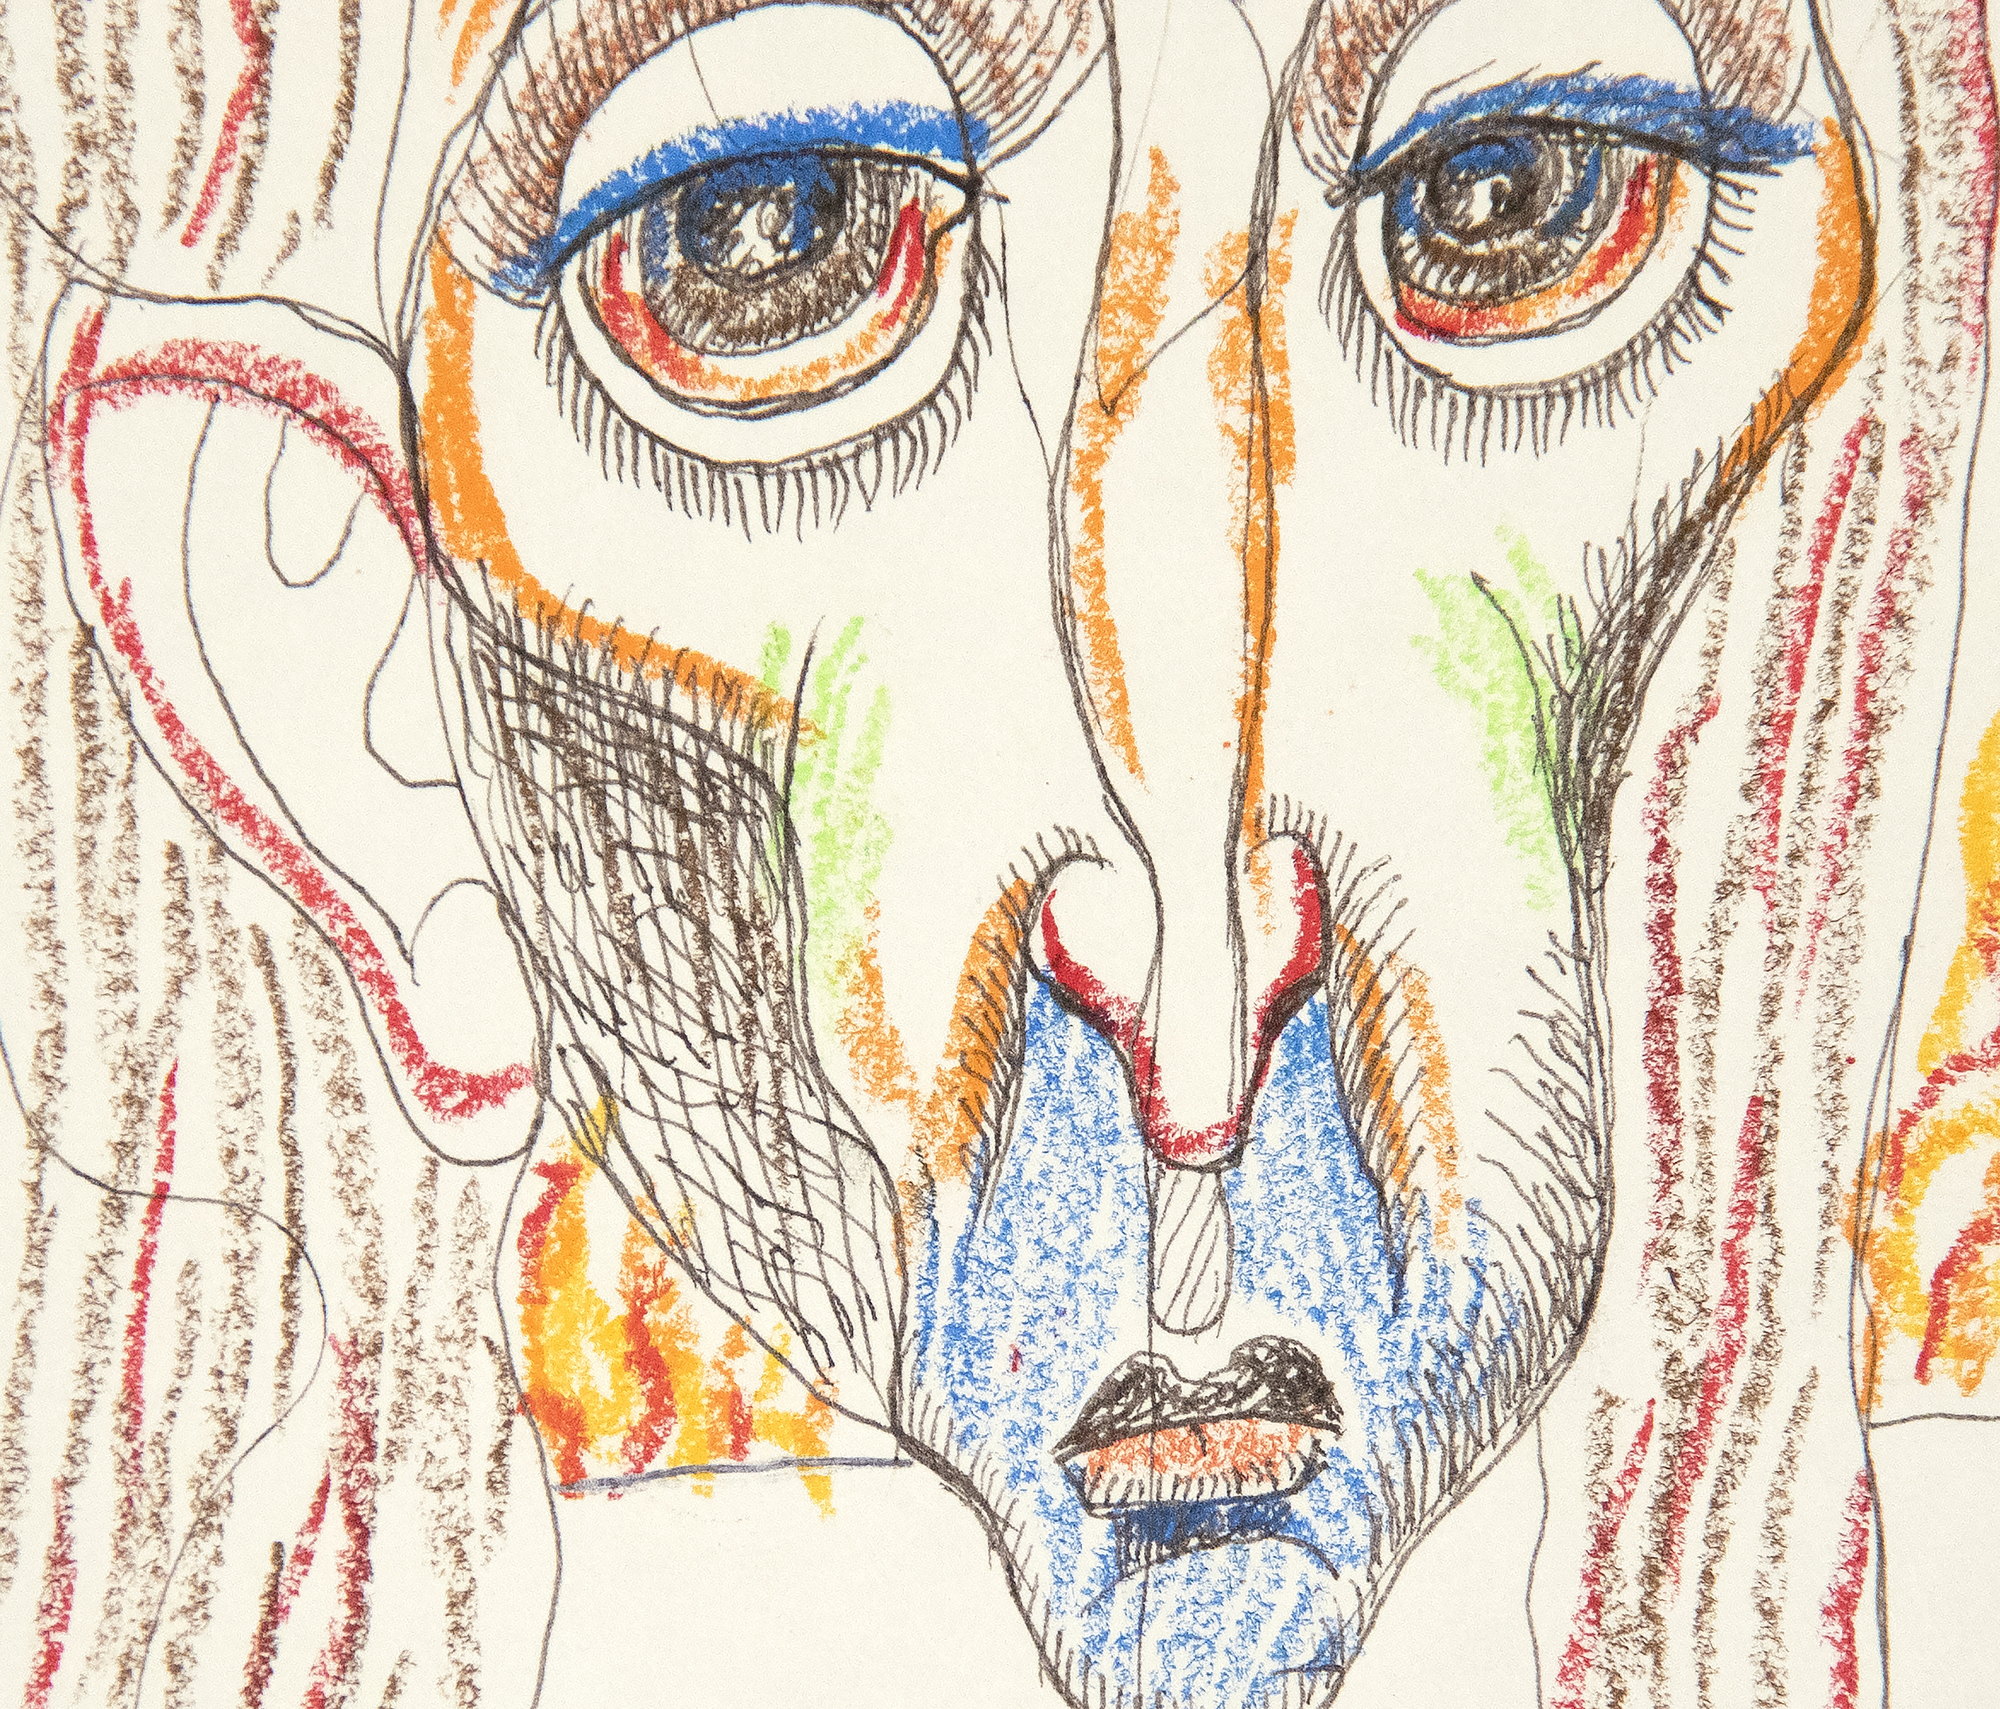 IRVING NORMAN - Untitled (Head with Fire) - graphite and crayon on paper - 12 x 8 7/8 in.